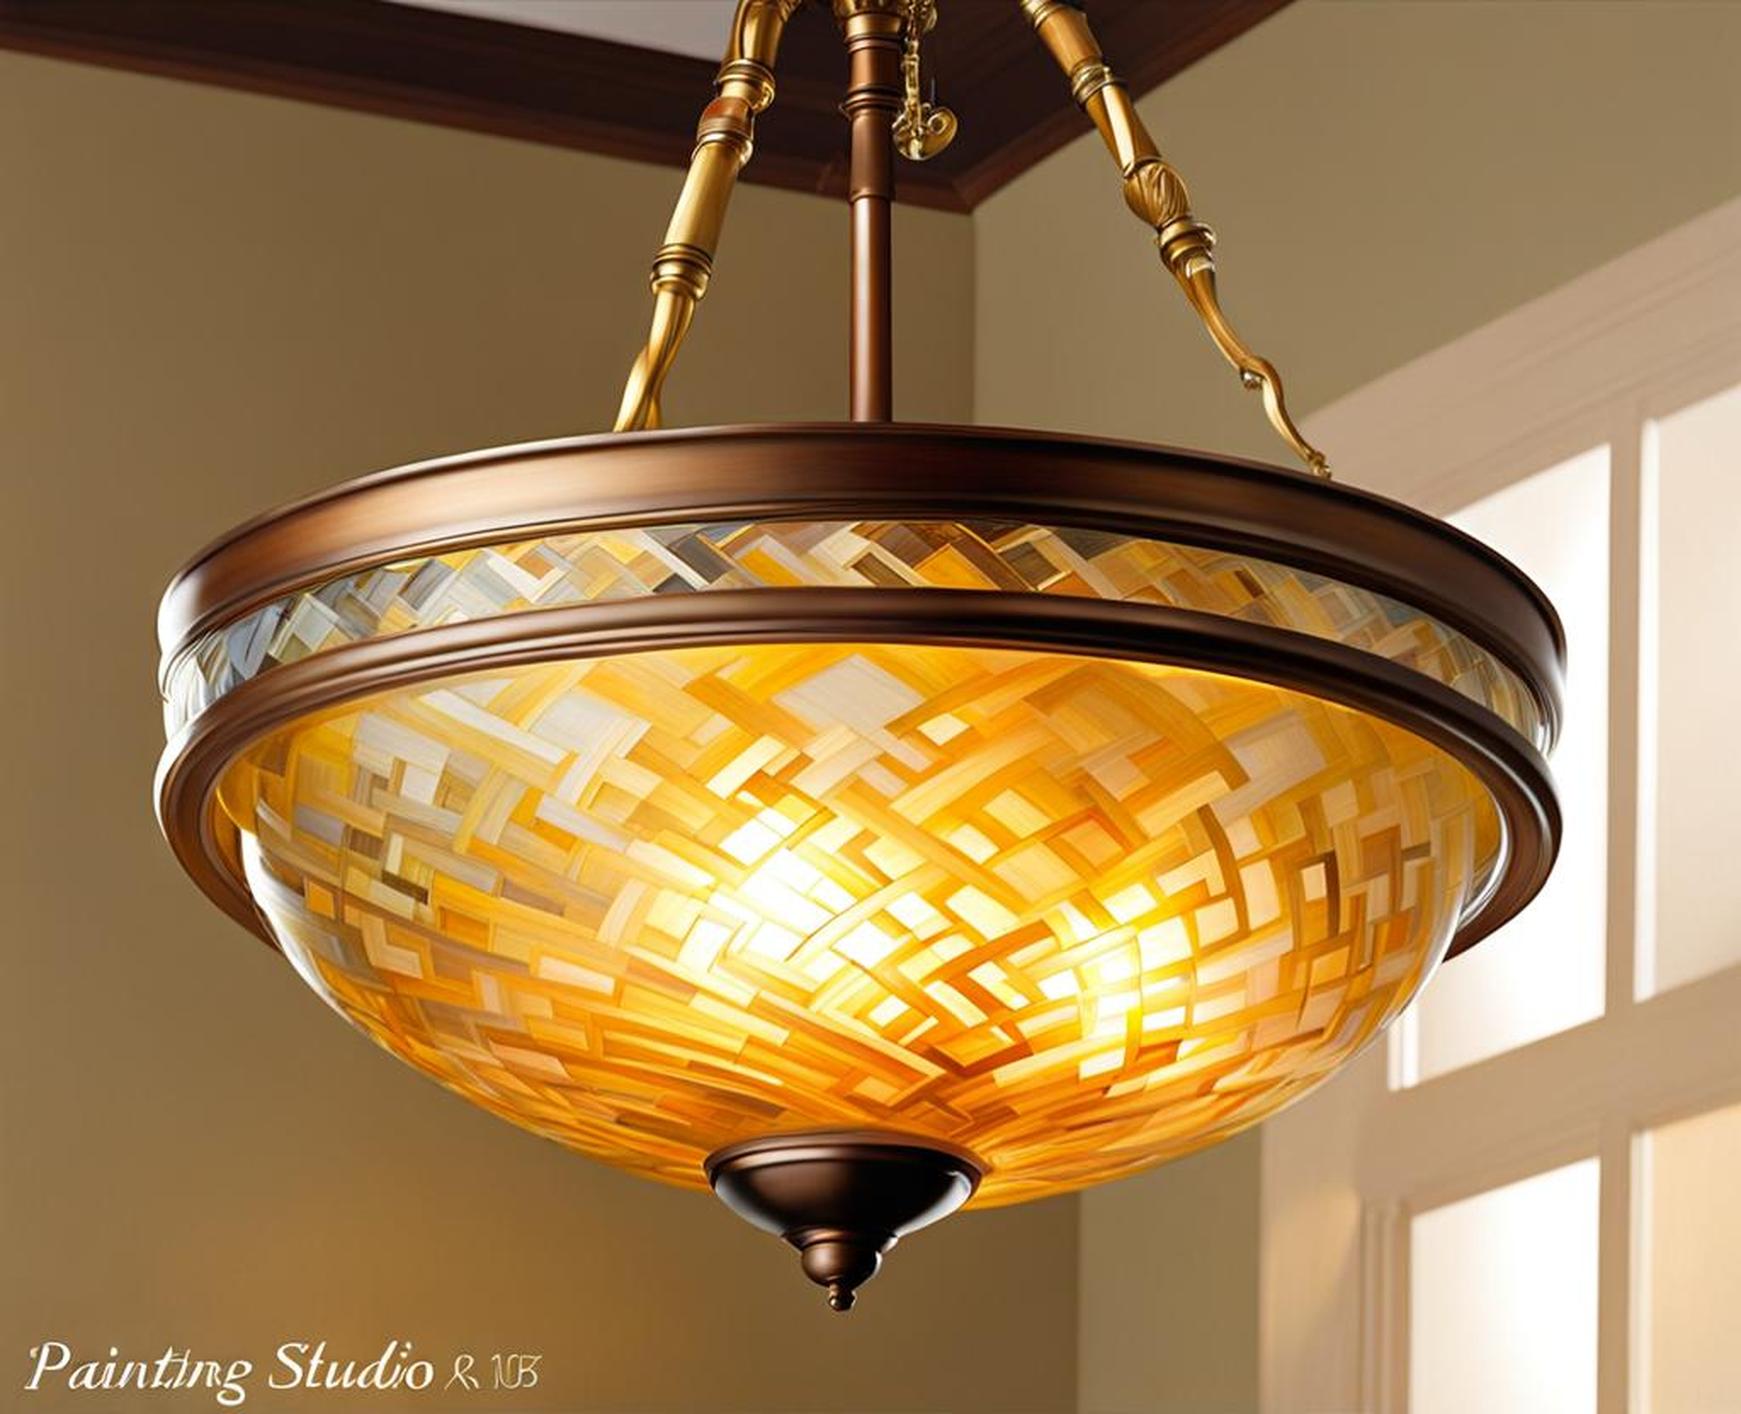 Custom Lighting on a Budget: How to Transform Basic Fixtures by Painting Glass